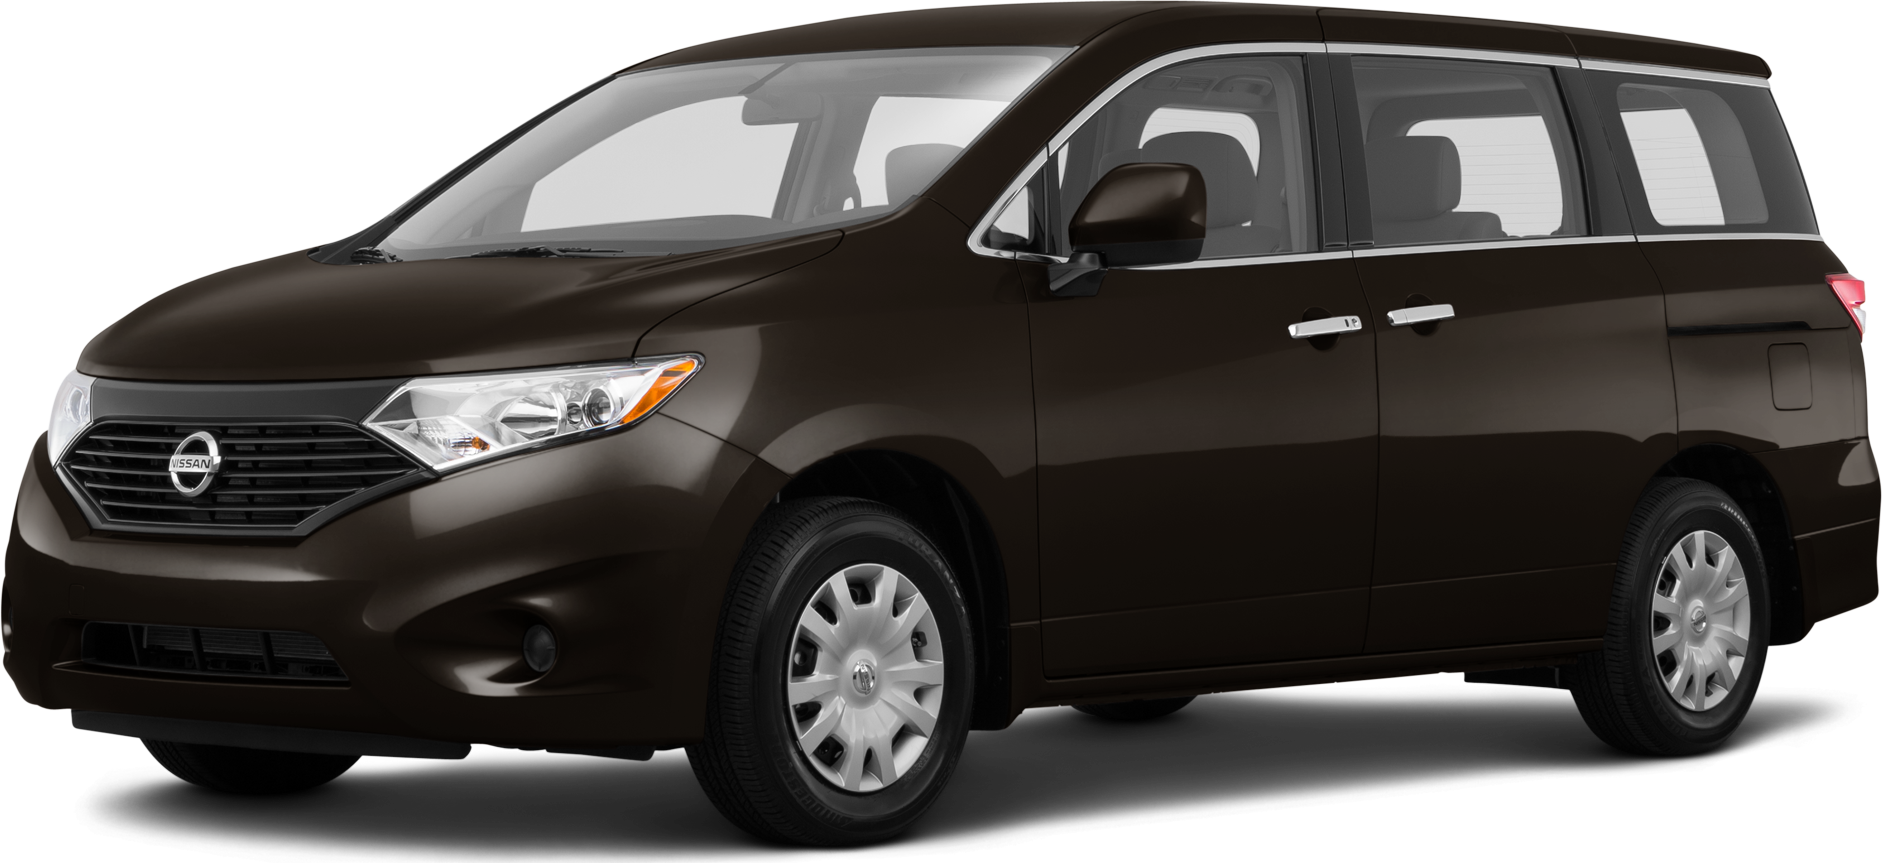 2017 Nissan Quest Value Ratings